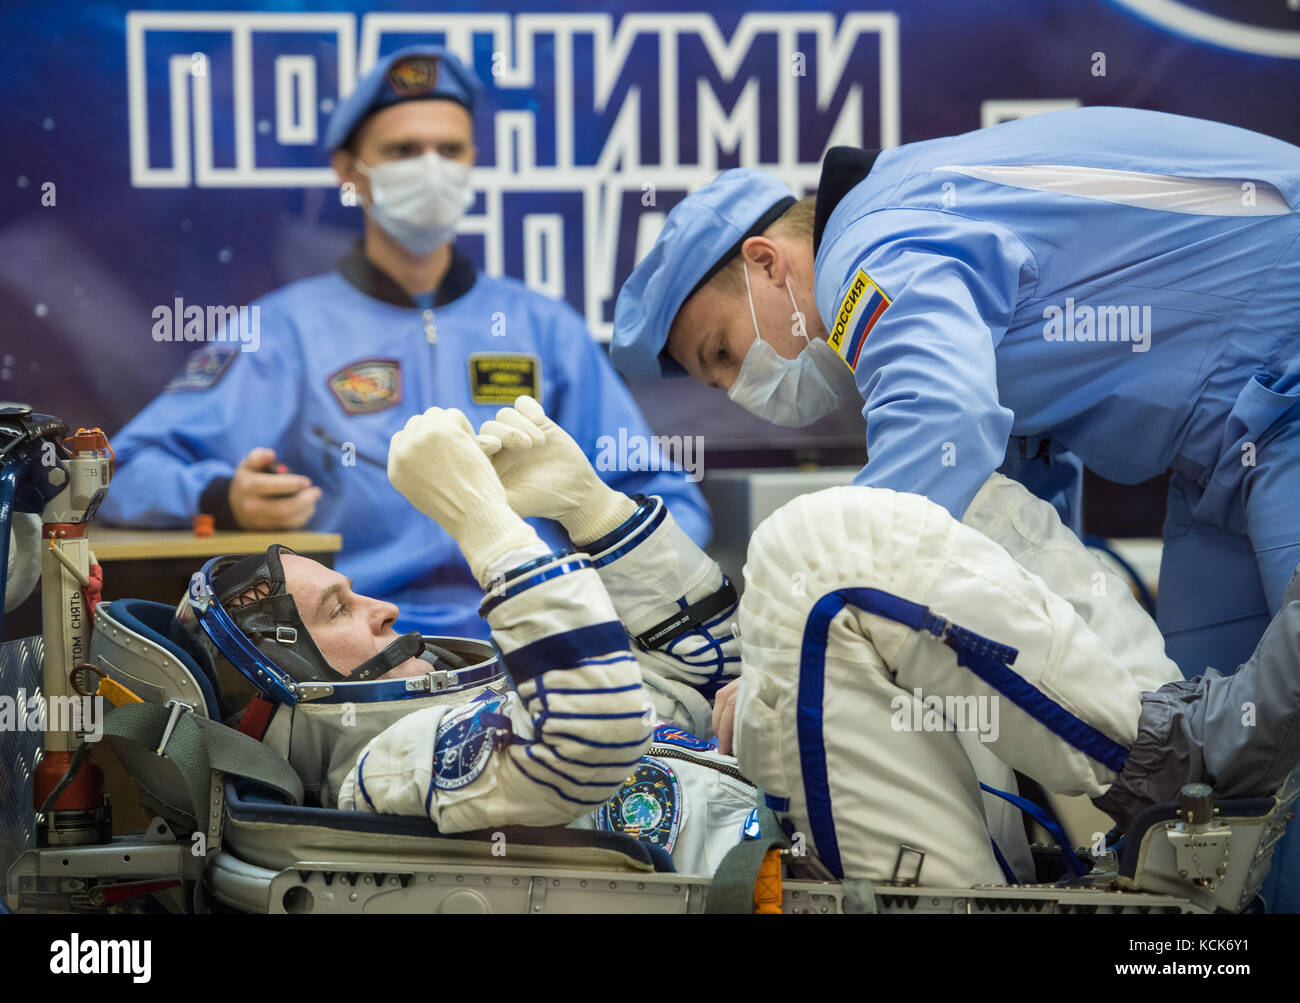 NASA International Space Station Expedition 52 prime crew member Russian cosmonaut Sergey Ryazanskiy of Roscosmos has his Sokol spacesuit pressure checked in preparation for the Soyuz MS-05 launch at the Baikonur Cosmodrome July 28, 2017 in Baikonur, Kazakhstan.  (photo by Joel Kowsky  via Planetpix) Stock Photo